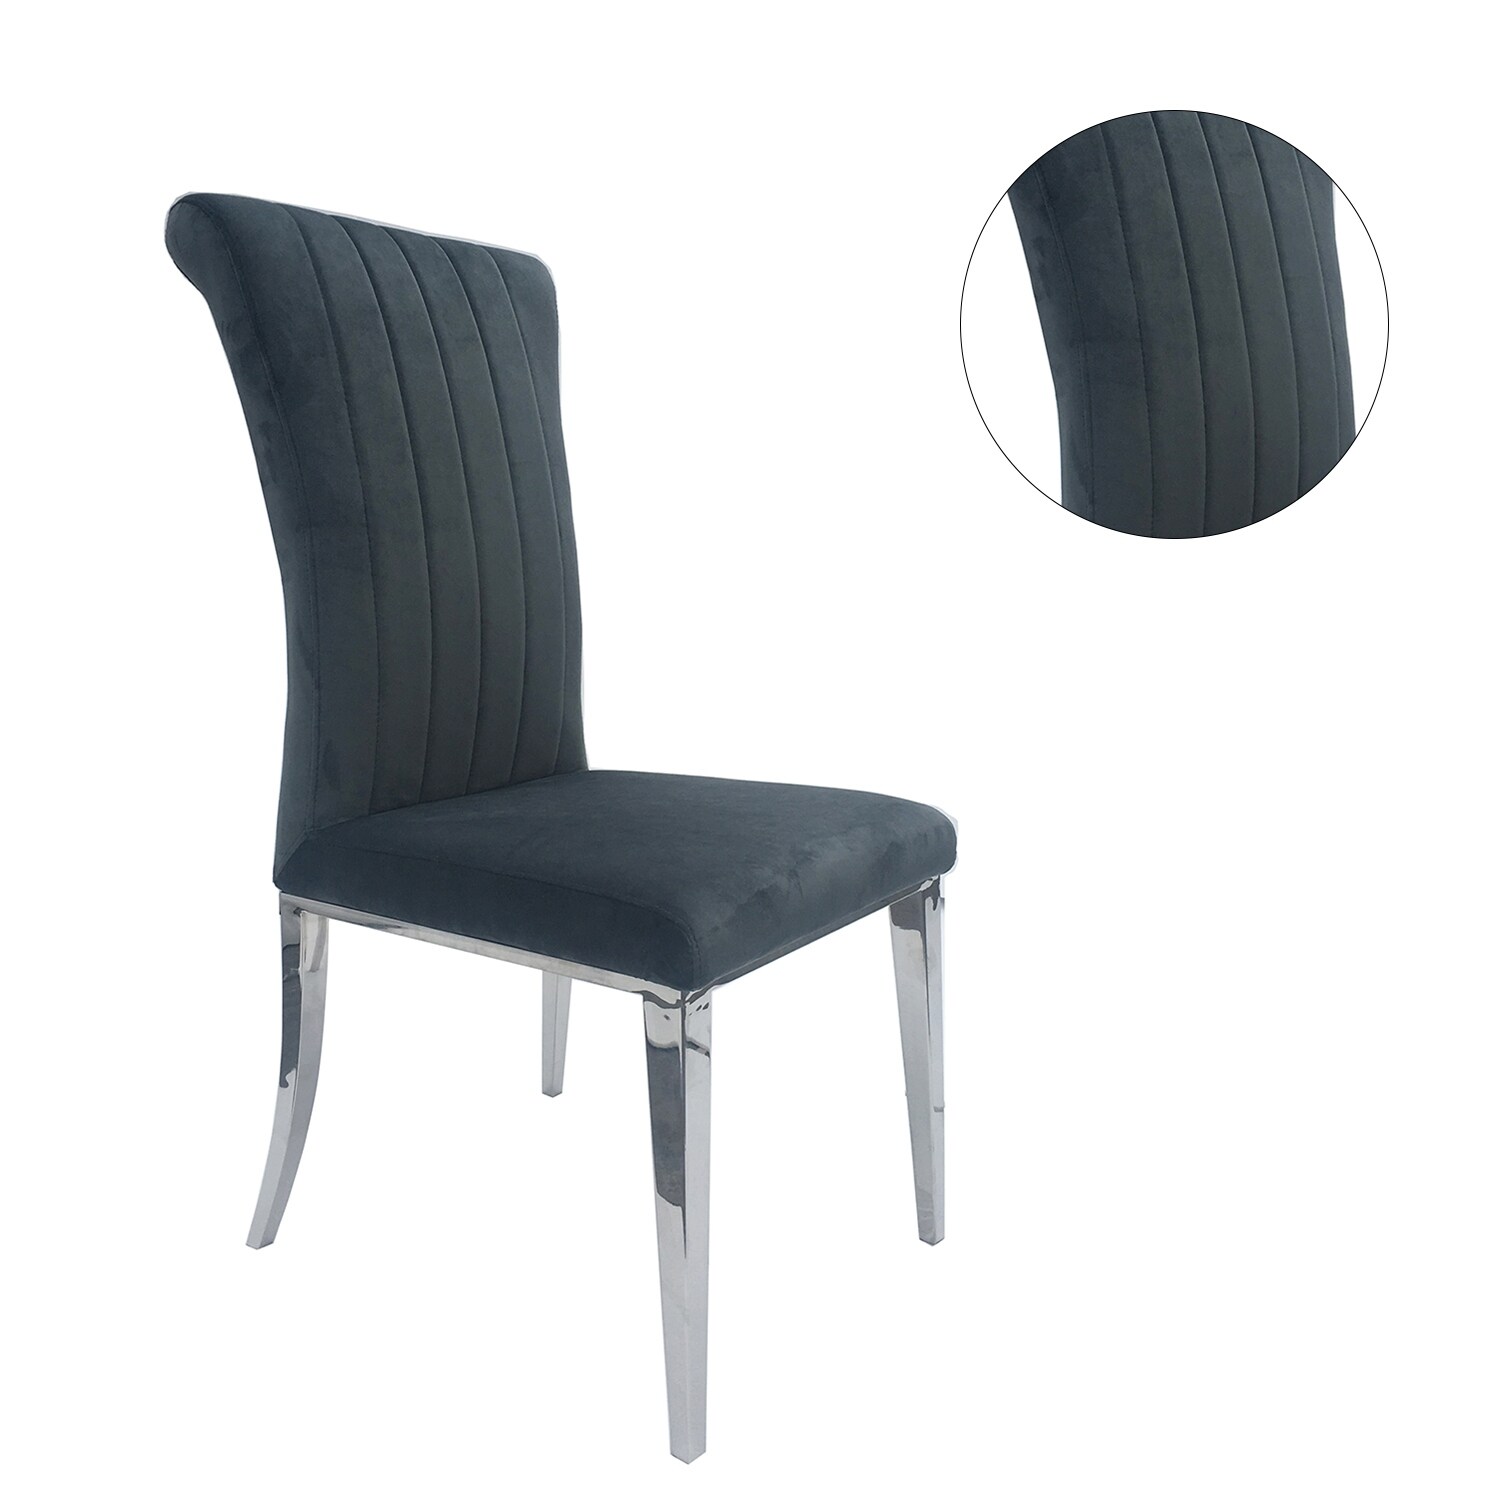 Set of 2 Dining Side Chairs with Chrome Legs in Dark Grey